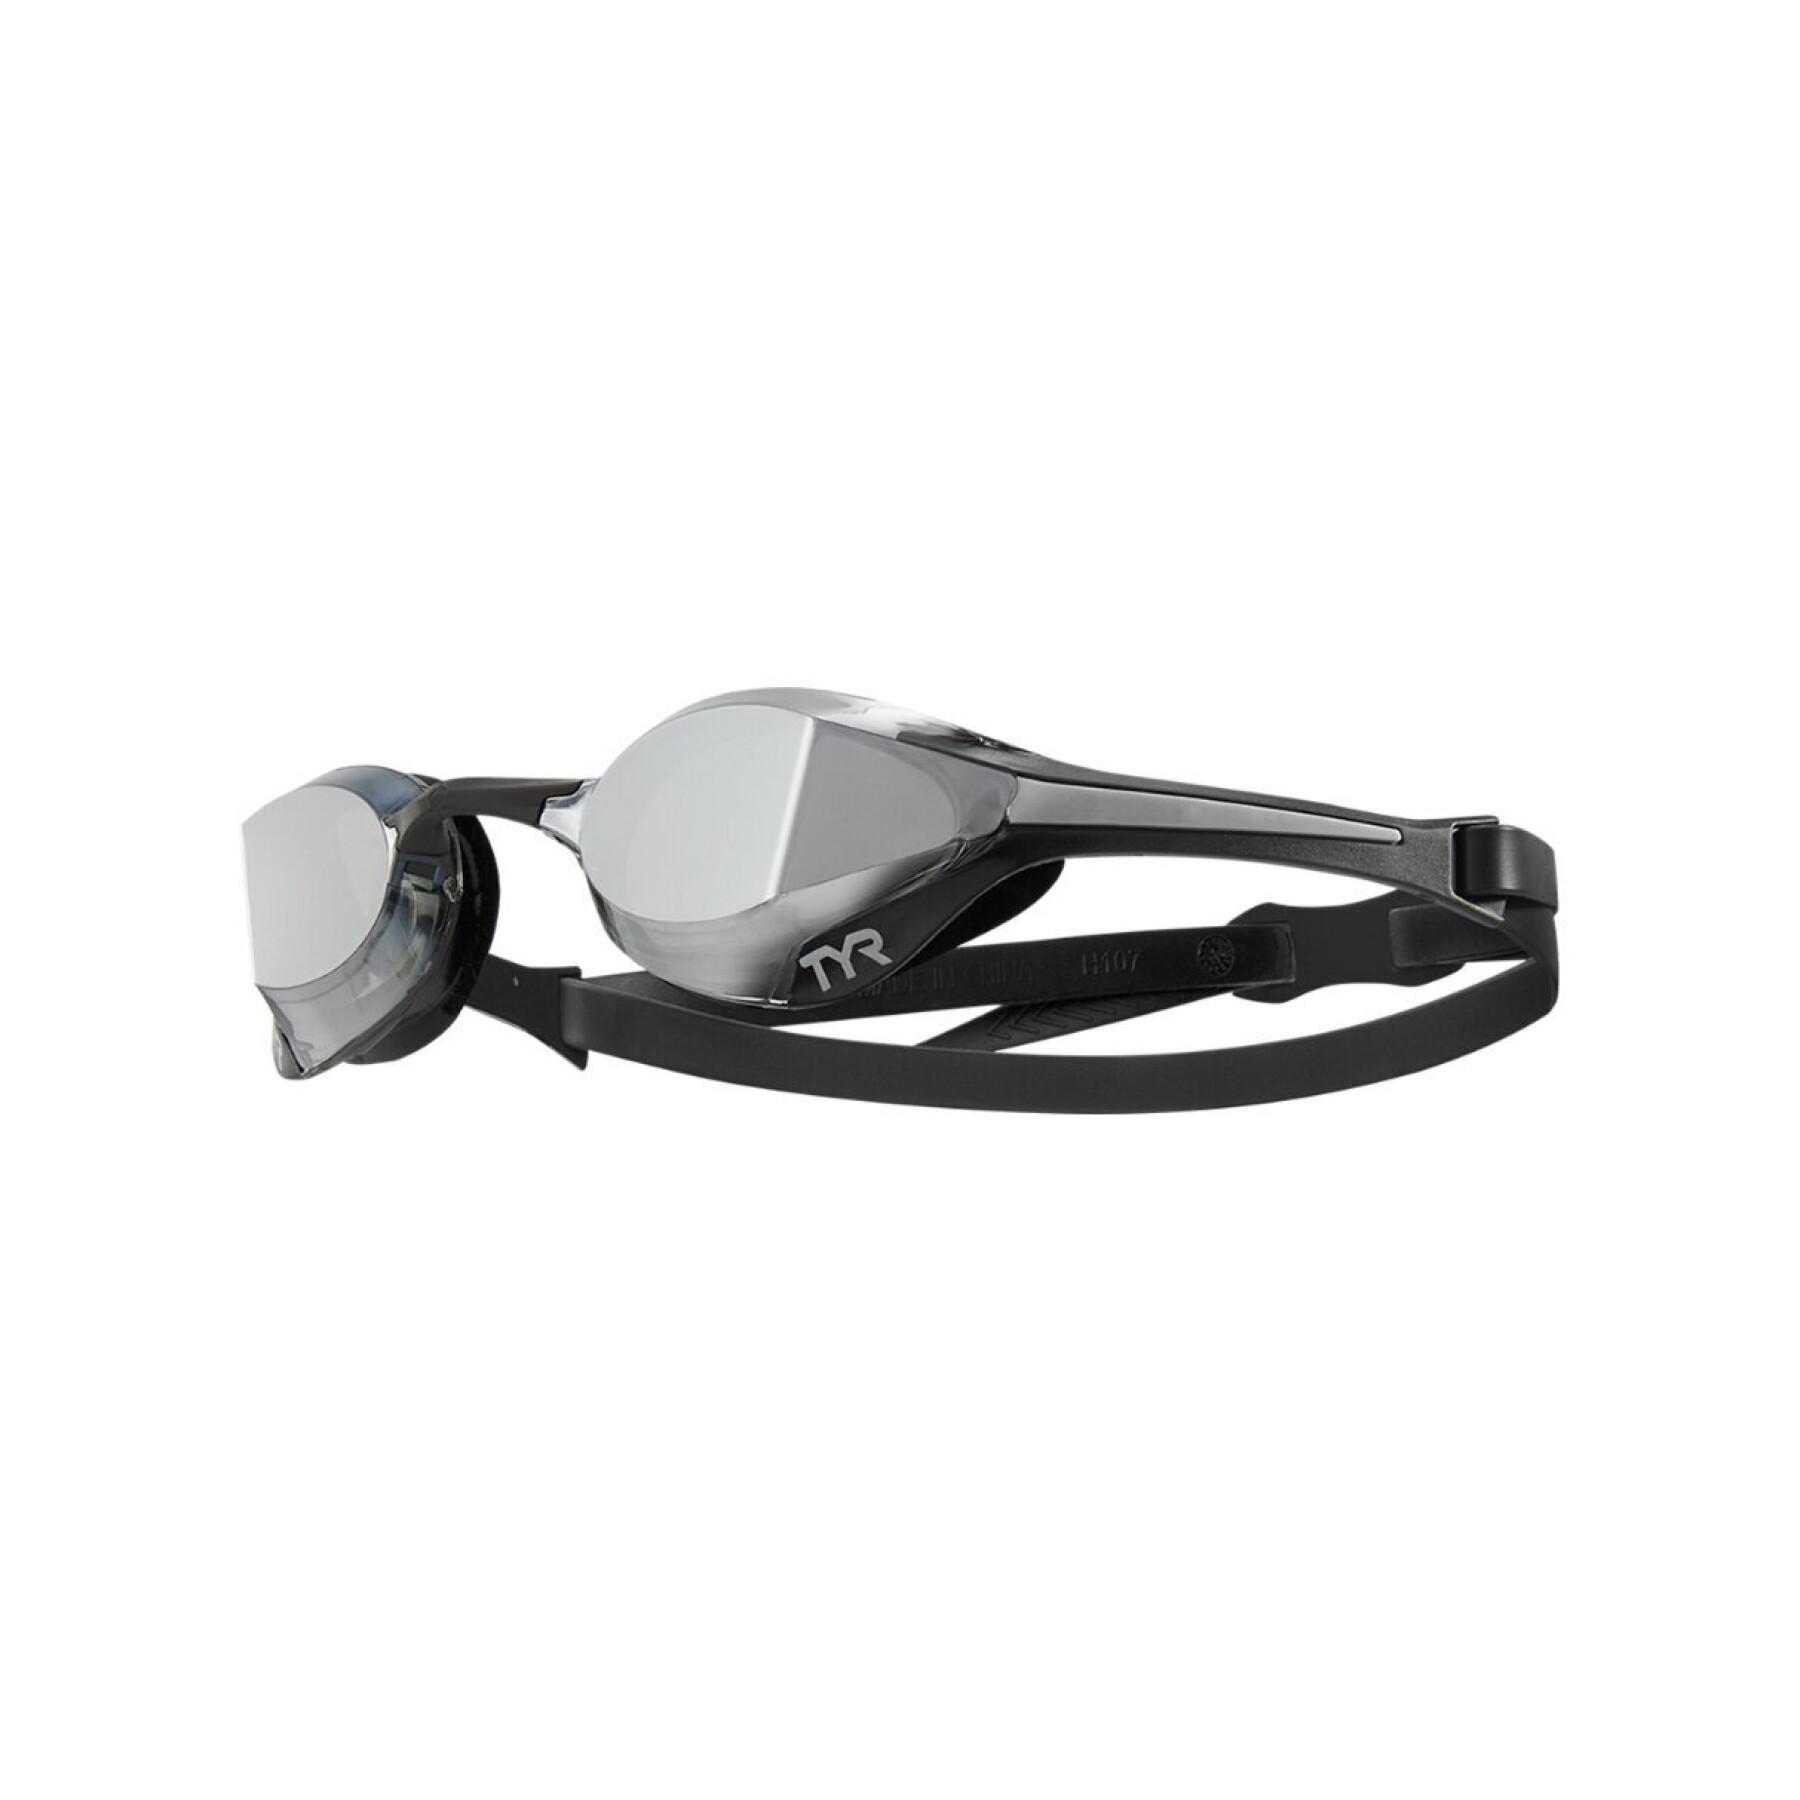 Schwimmbrille TYR tracer-x elite mirrored racing goggles